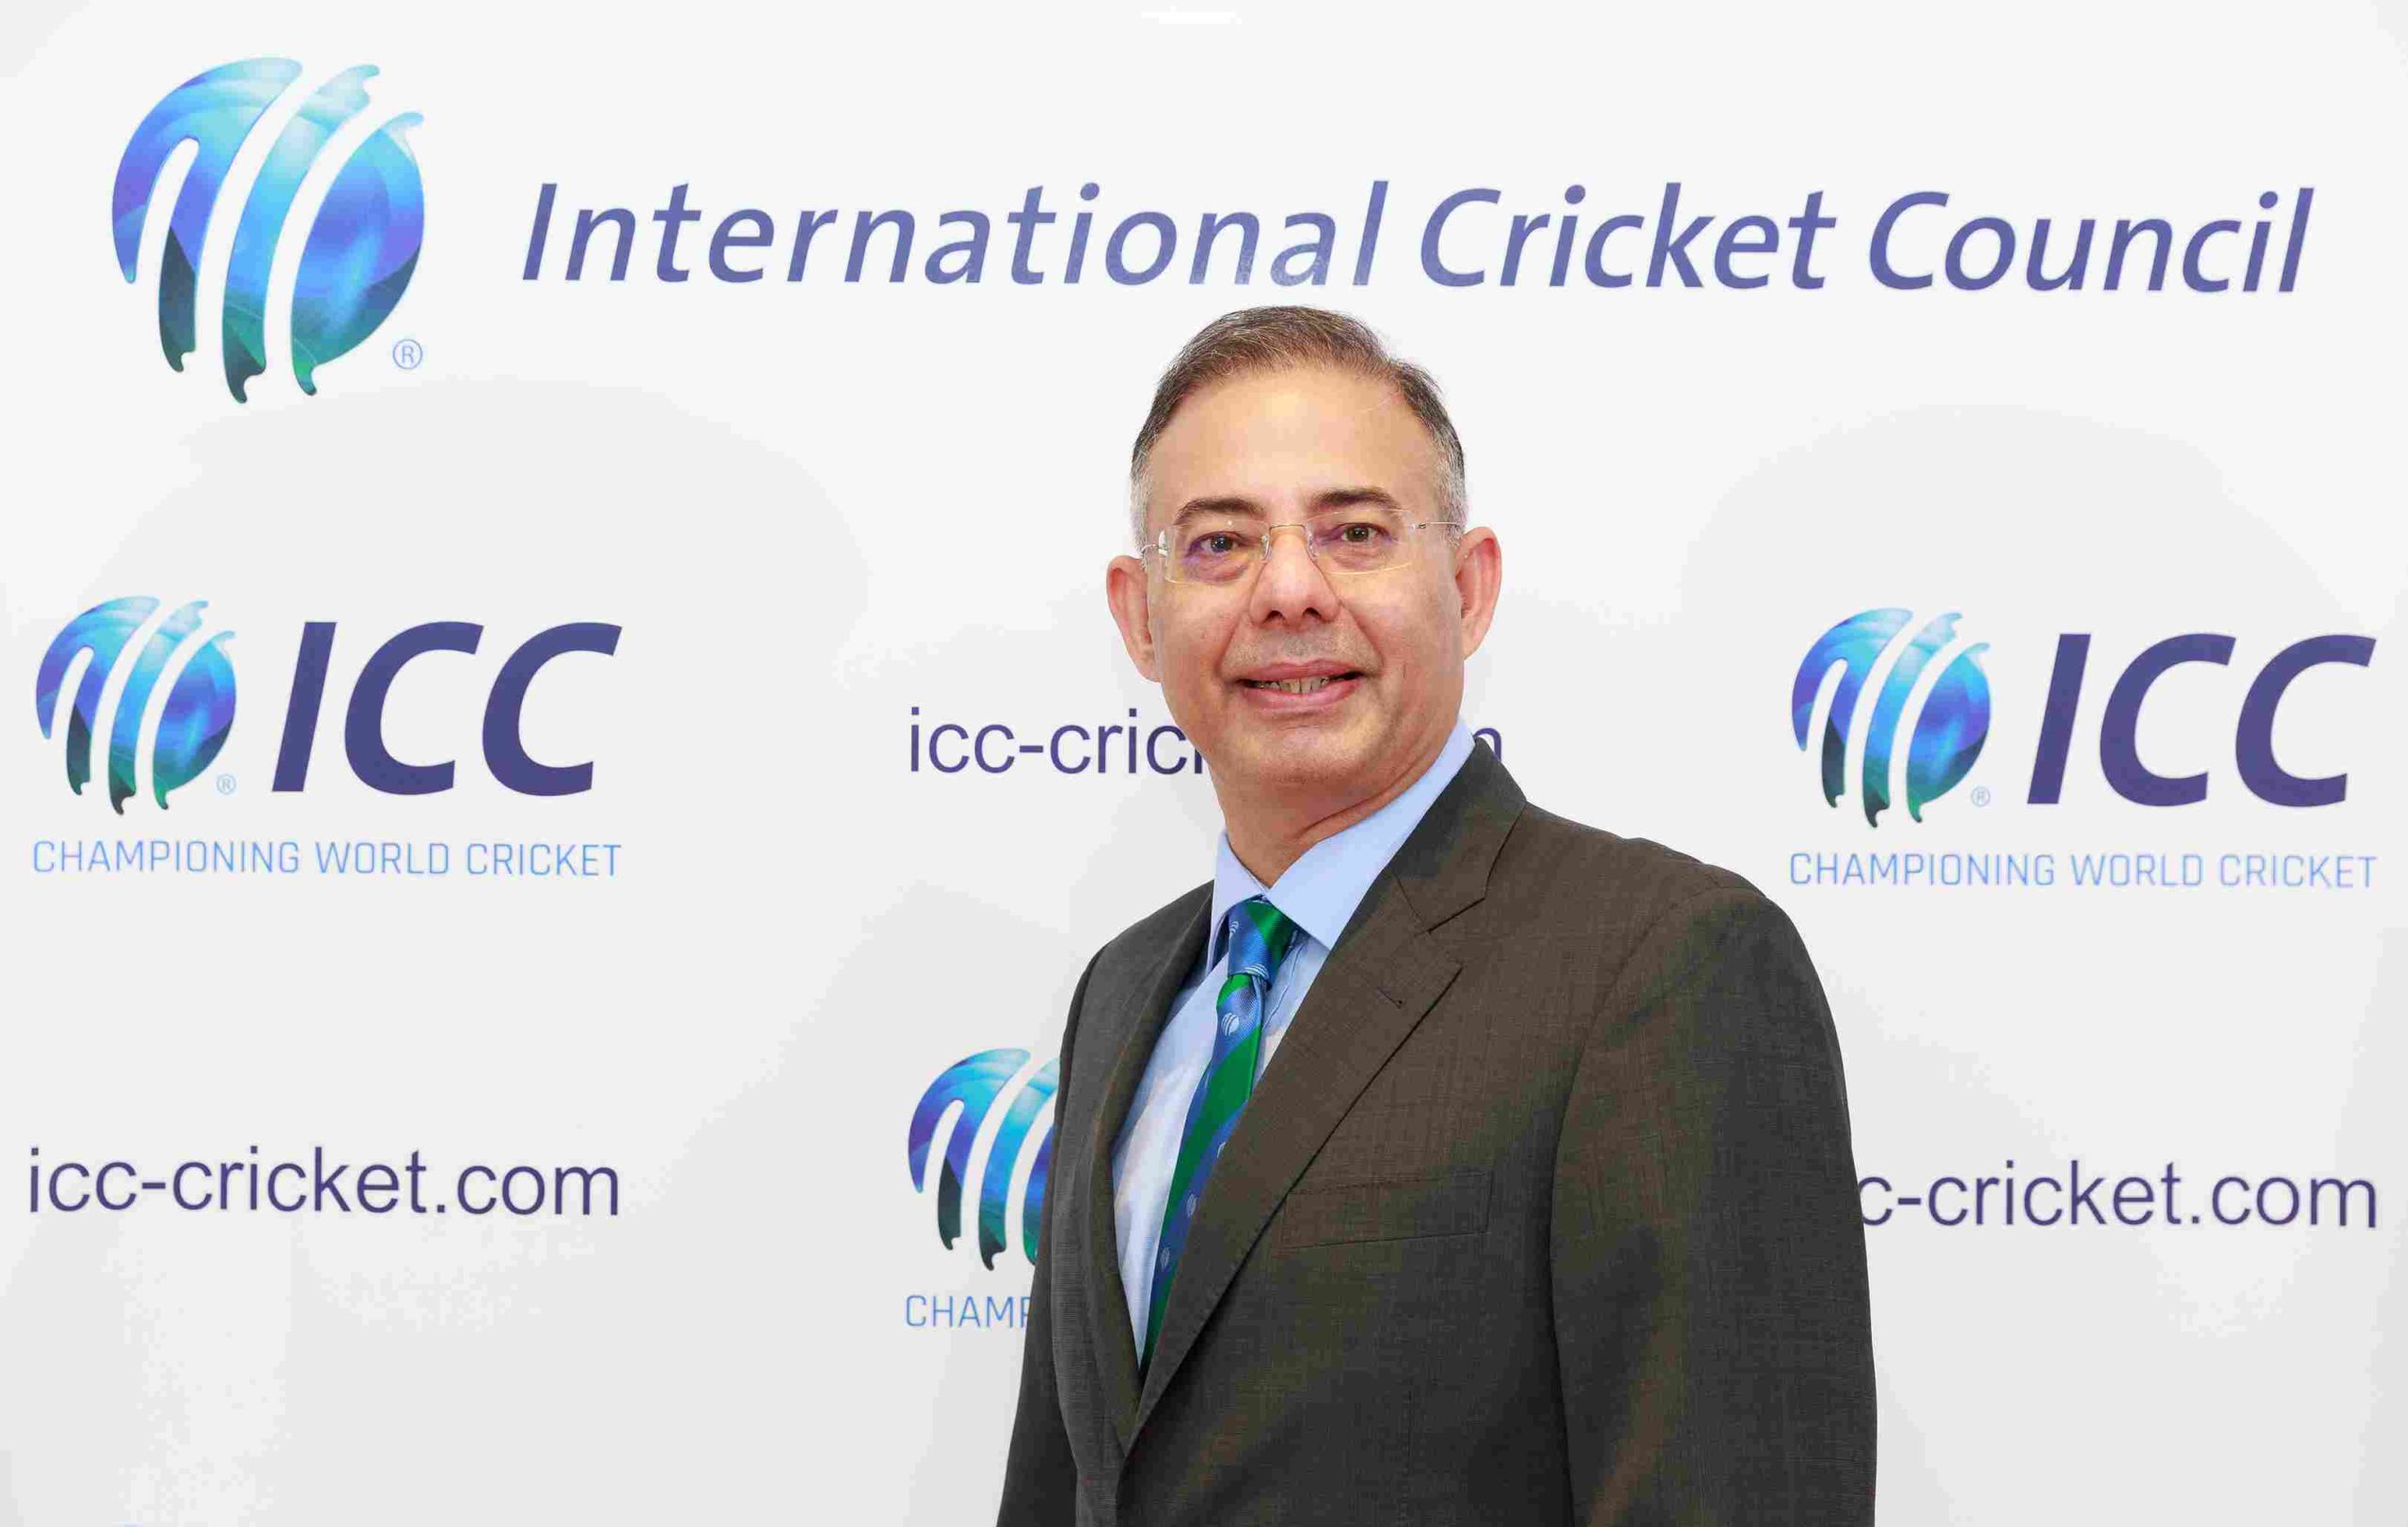 ICC: Unveils 3 New Rules For International Cricket